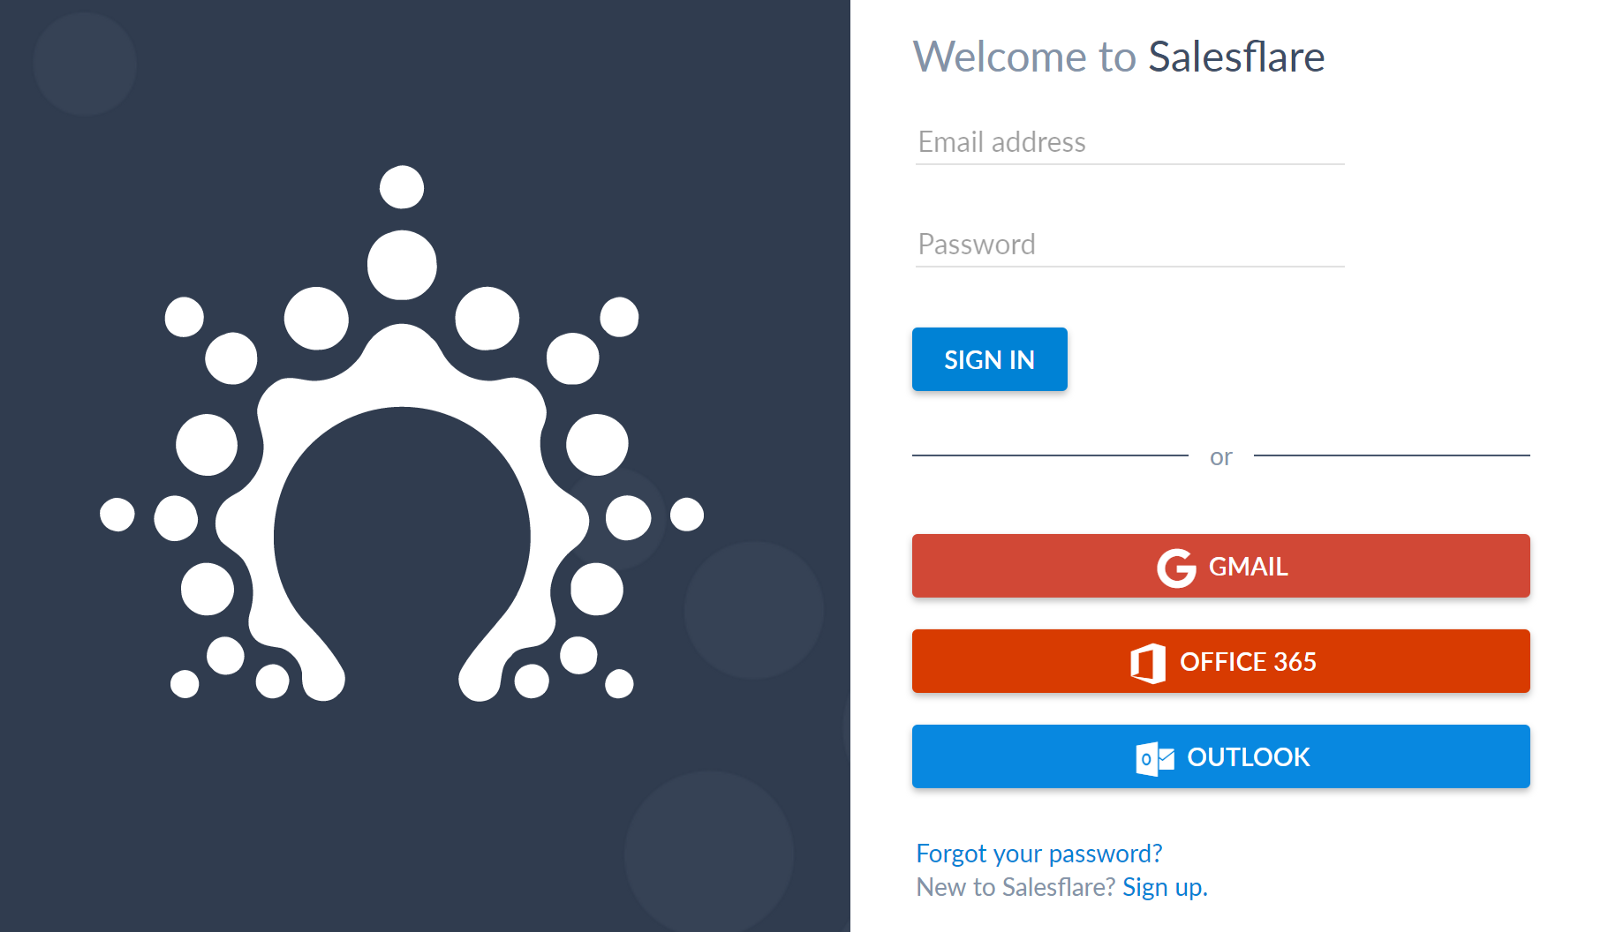 Salesflare email integration with gmail, office 365 and outlook